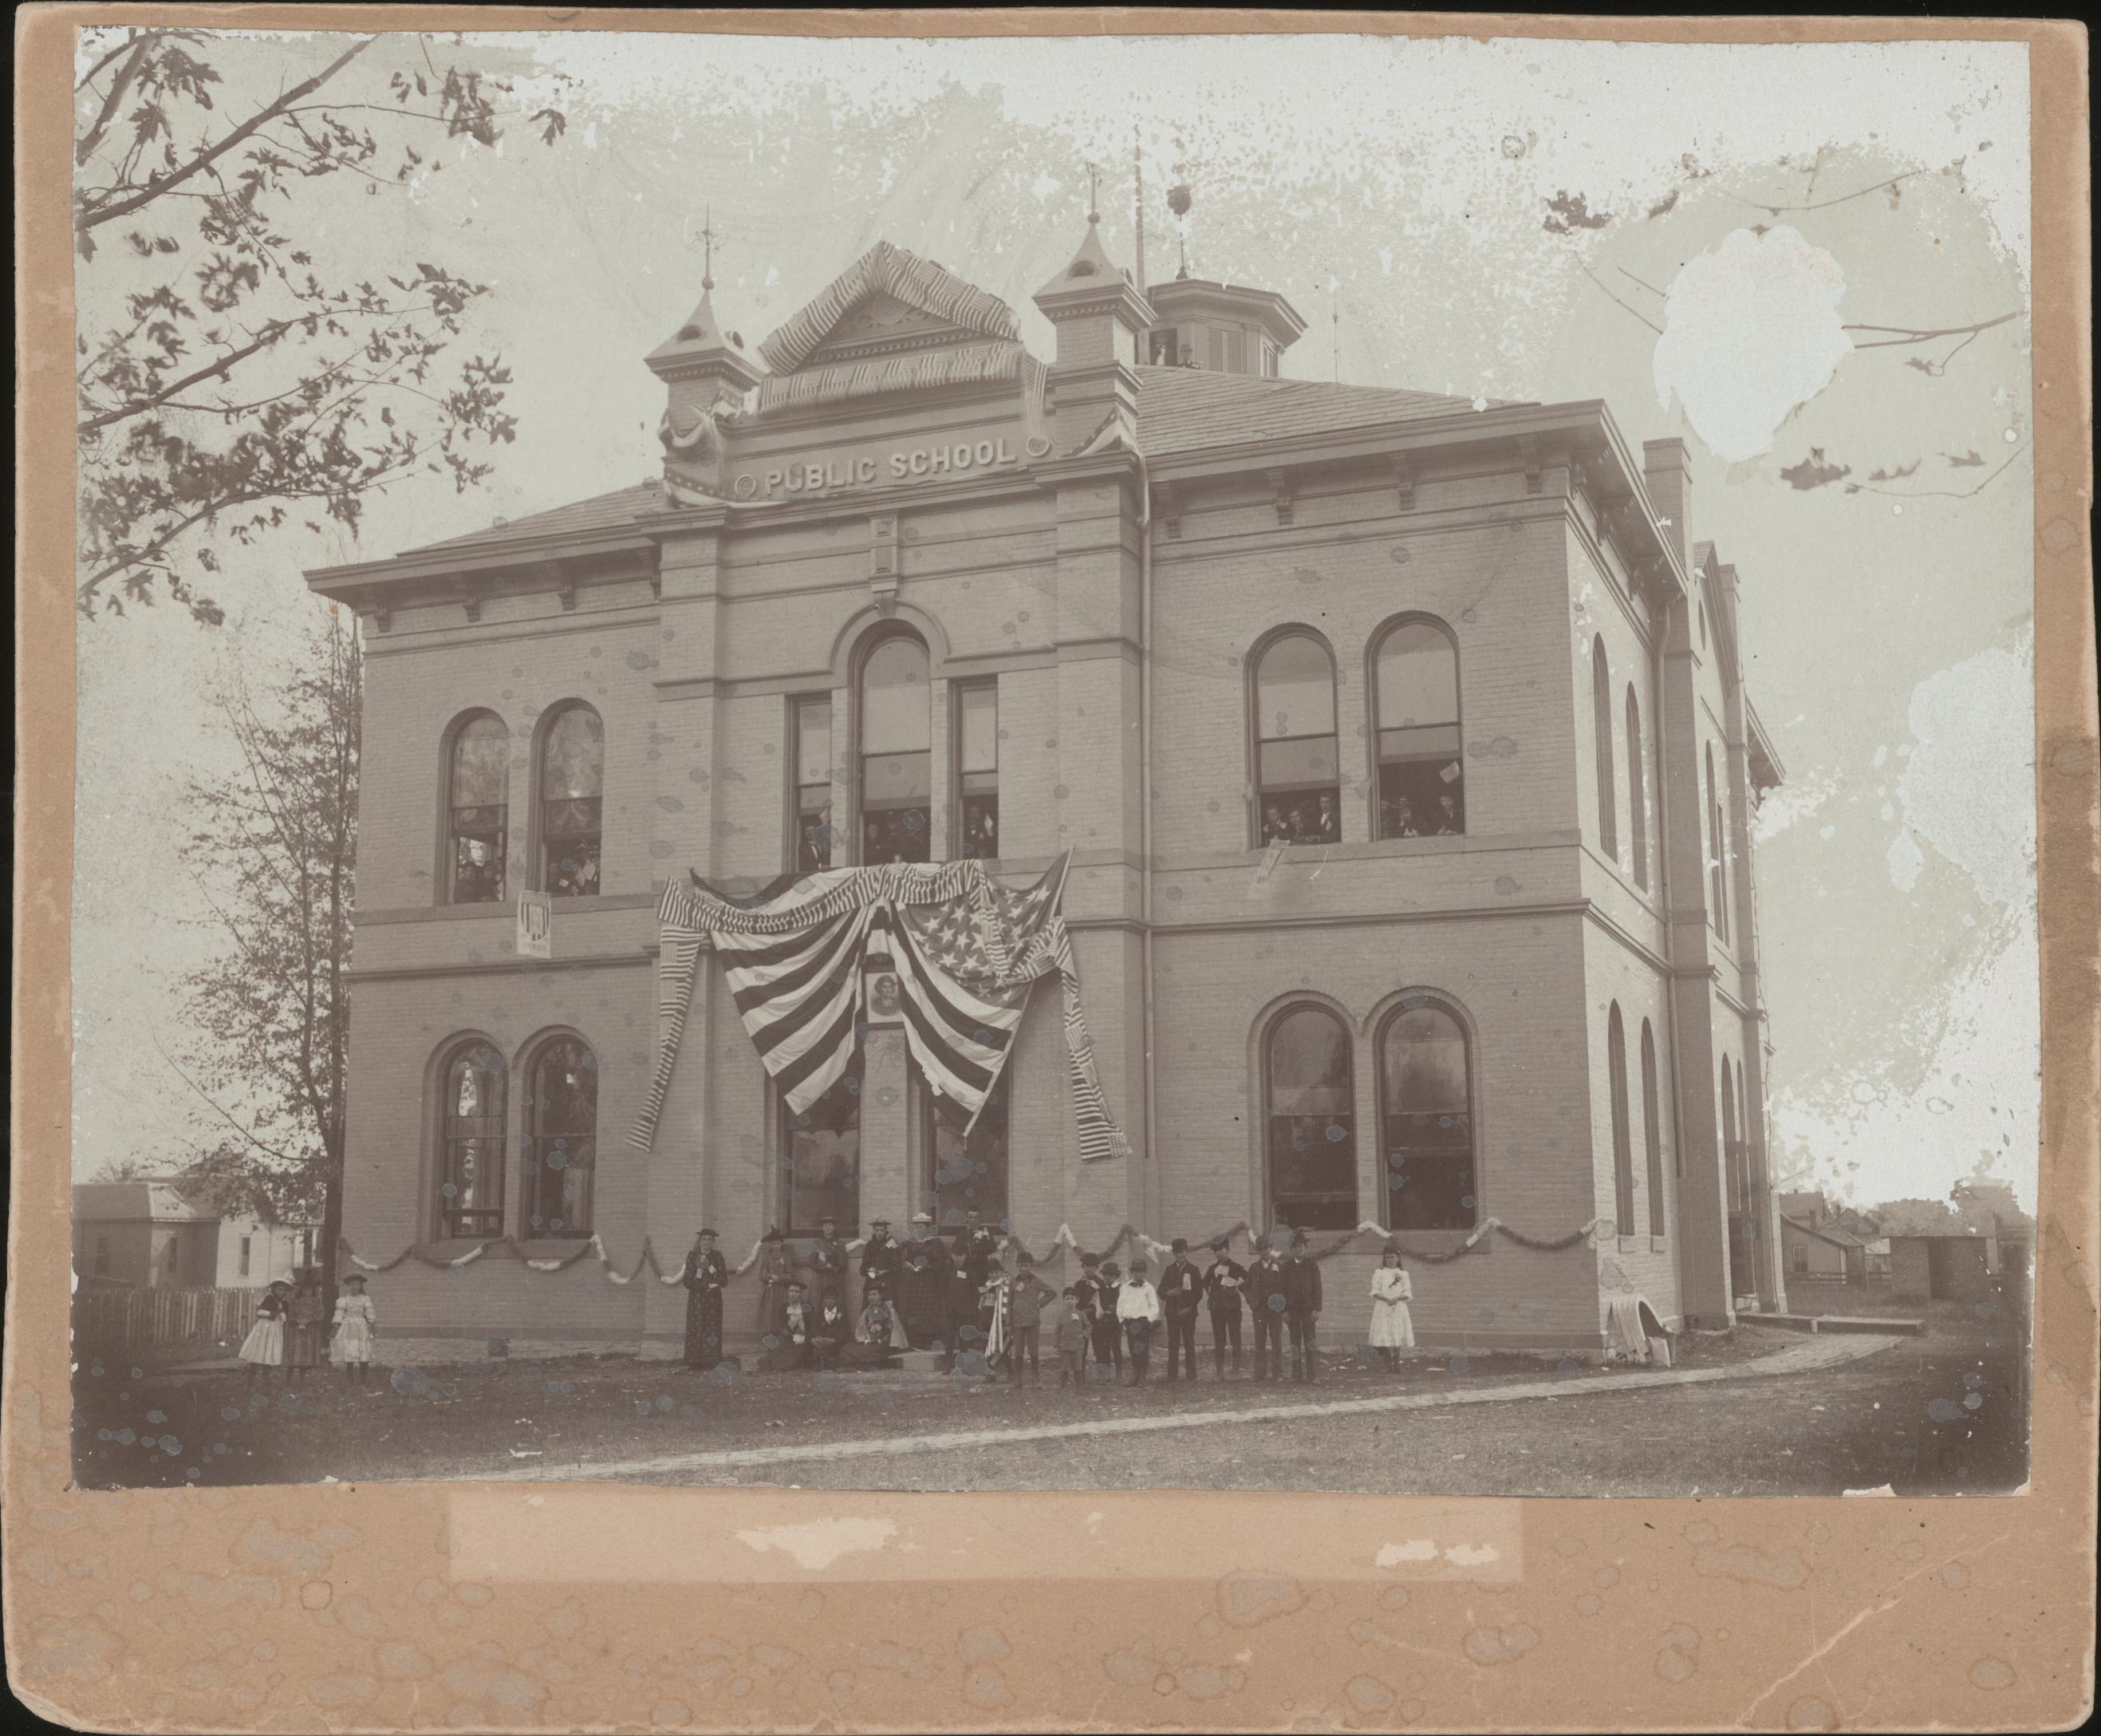 Tipton High School in 1869. An American flag adorns the front of the building. Group of people standing in front of the doors